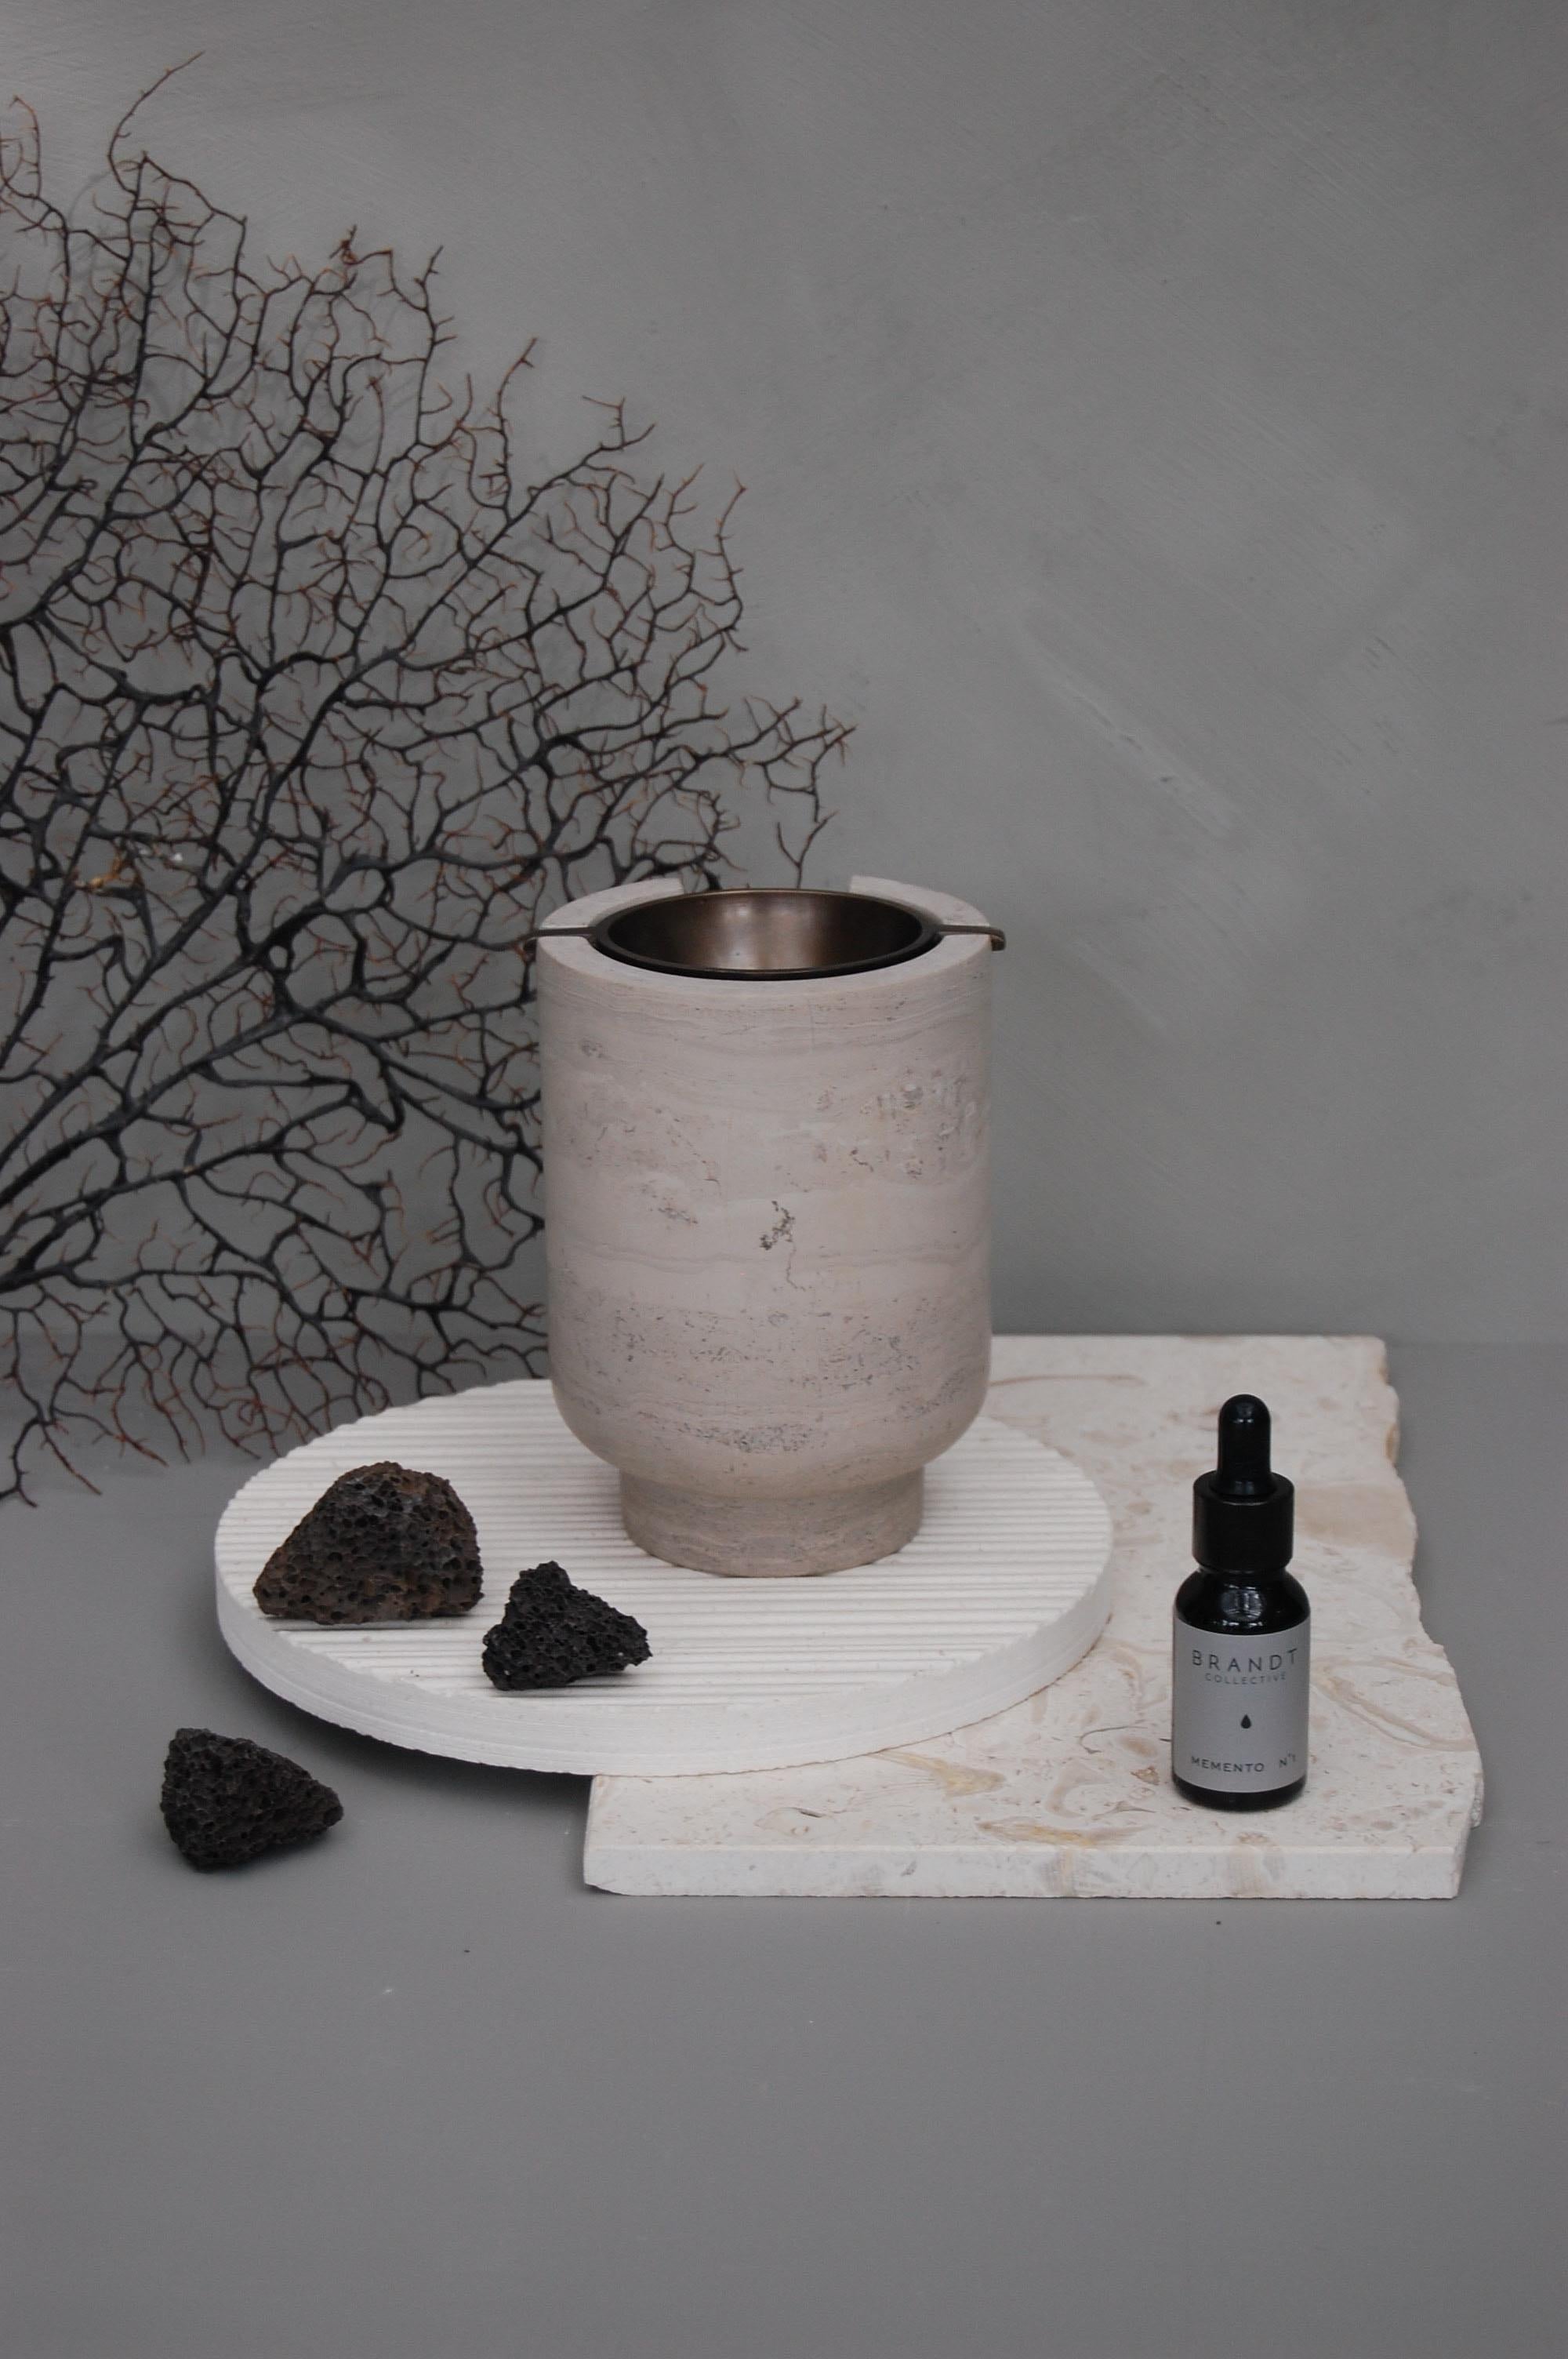 AURA Oil Burner in Chalk Grey is a beautiful diffuser made of natural marble and here with a burnished brass bowl. AURA Oil Burner is not only an aesthetic object, but it also creates an atmosphere with our scented, ambient aromatherapy oils. AURA